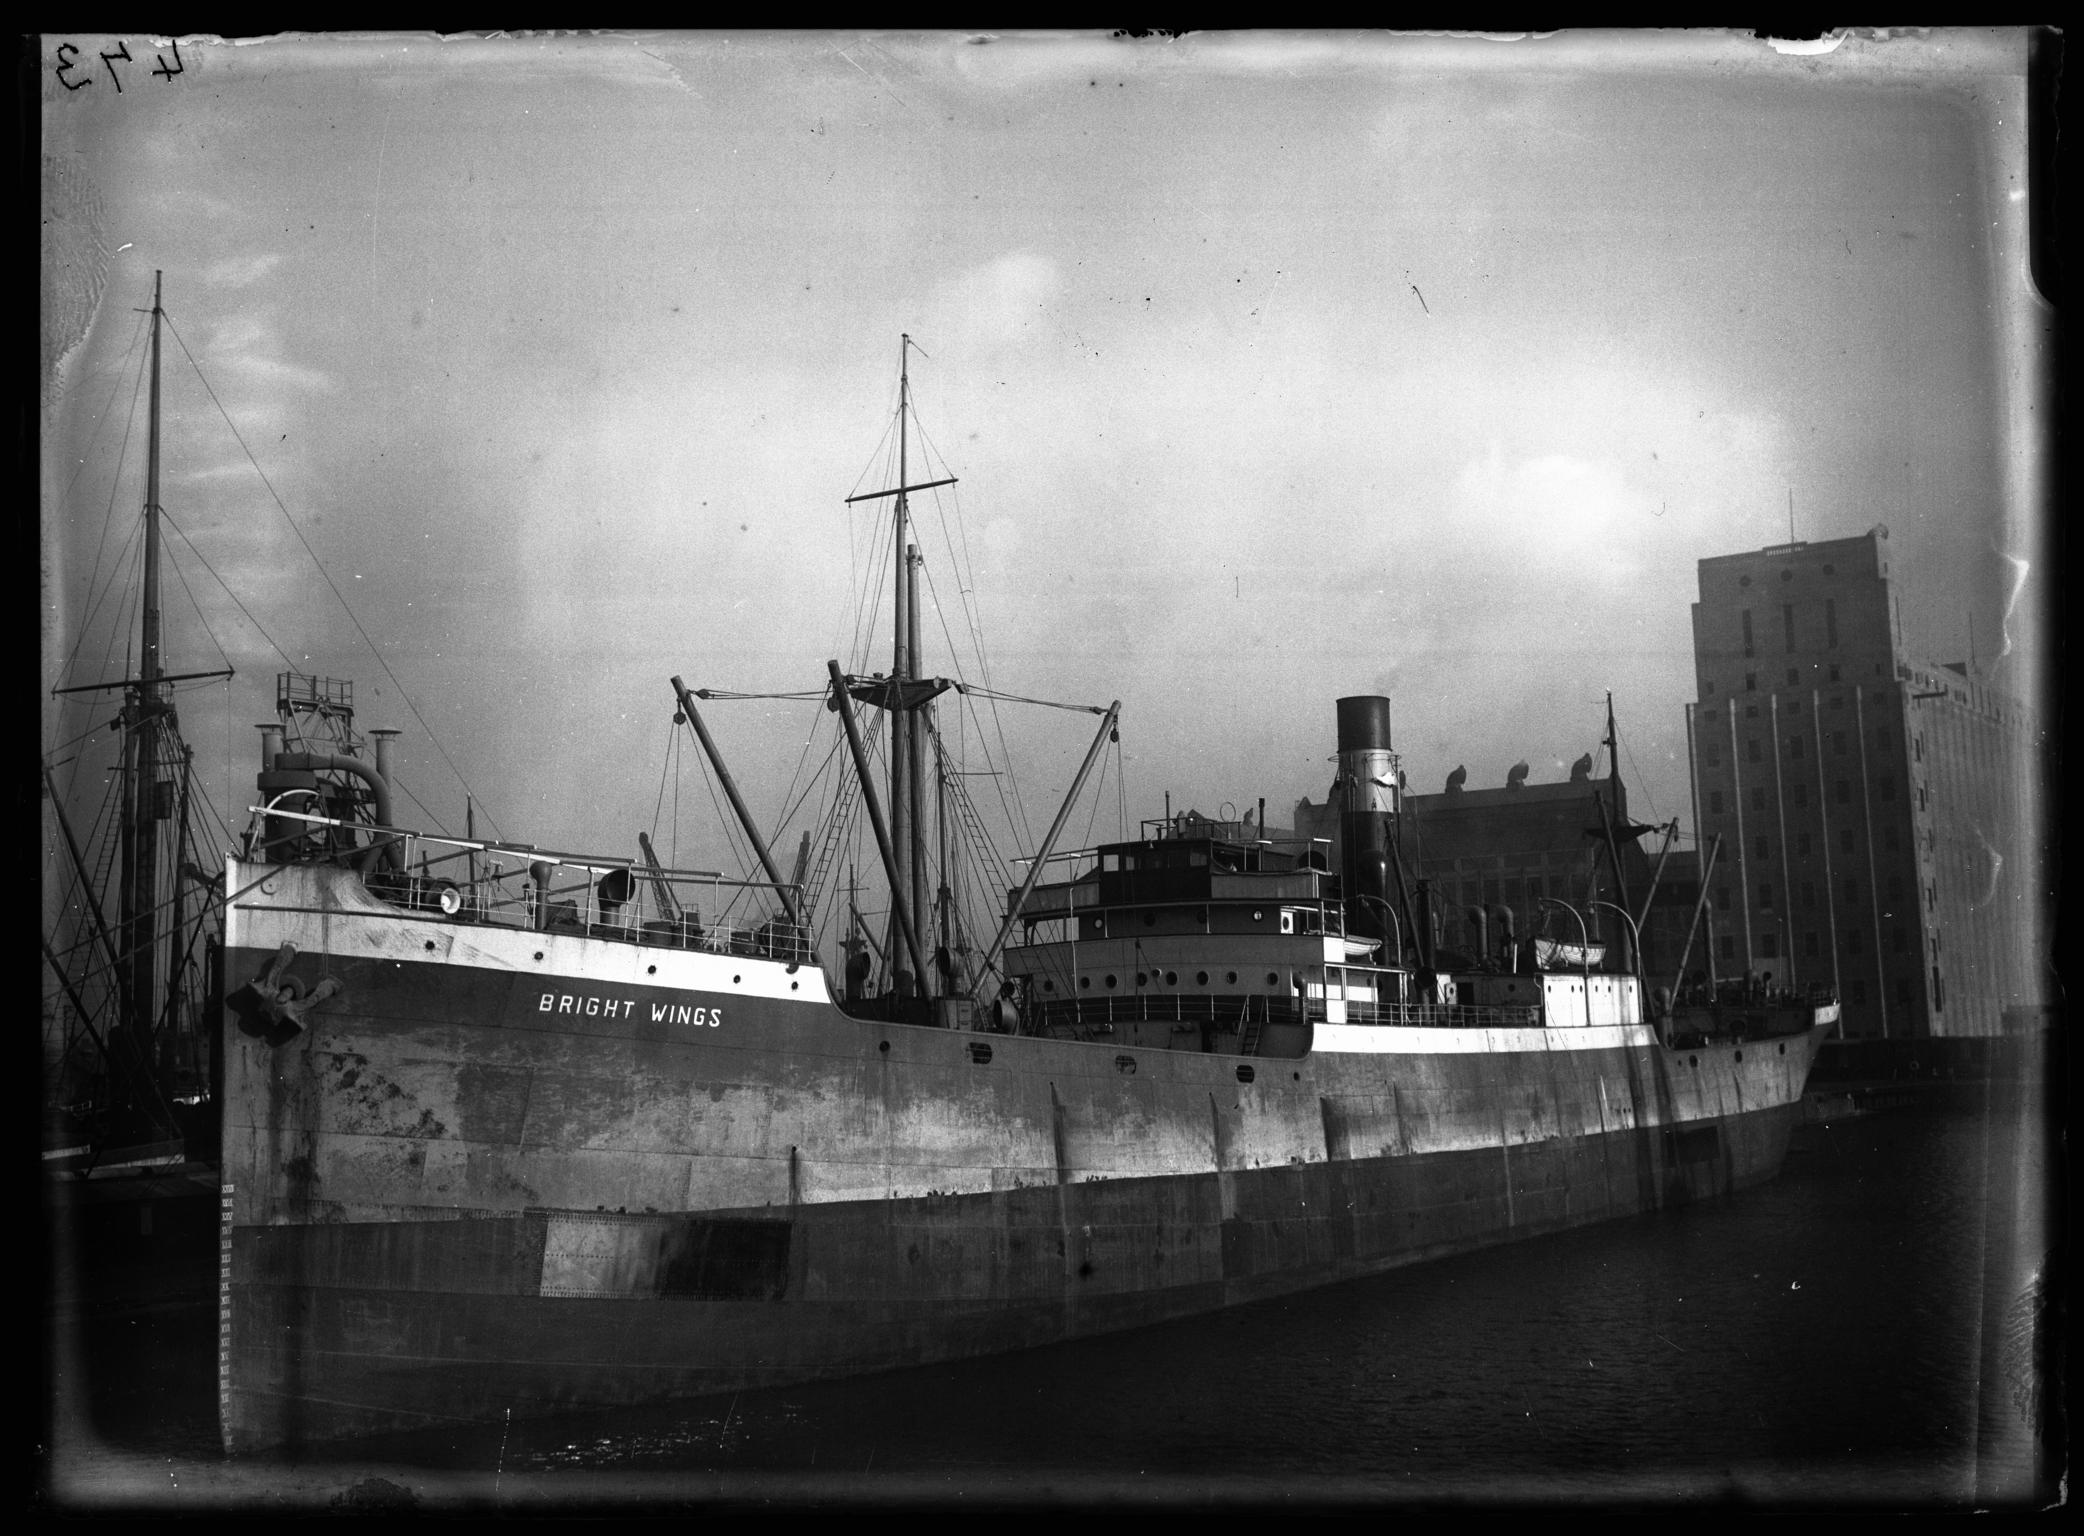 S.S. BRIGHTWINGS, glass negative